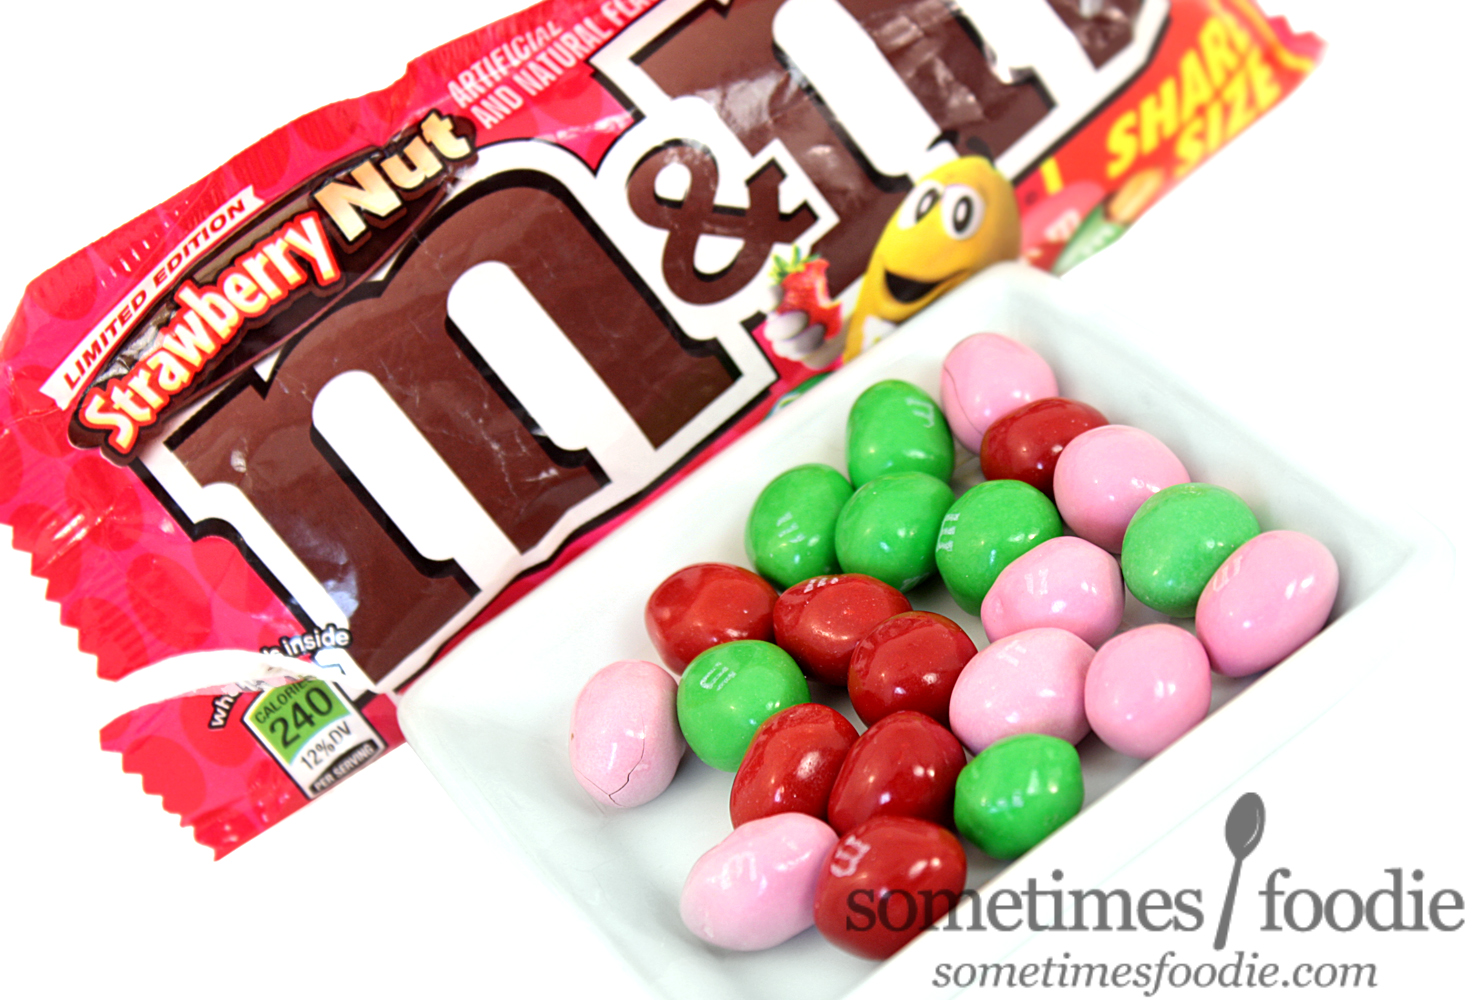 REVIEW: Limited Edition Strawberry Nut M&M's - The Impulsive Buy